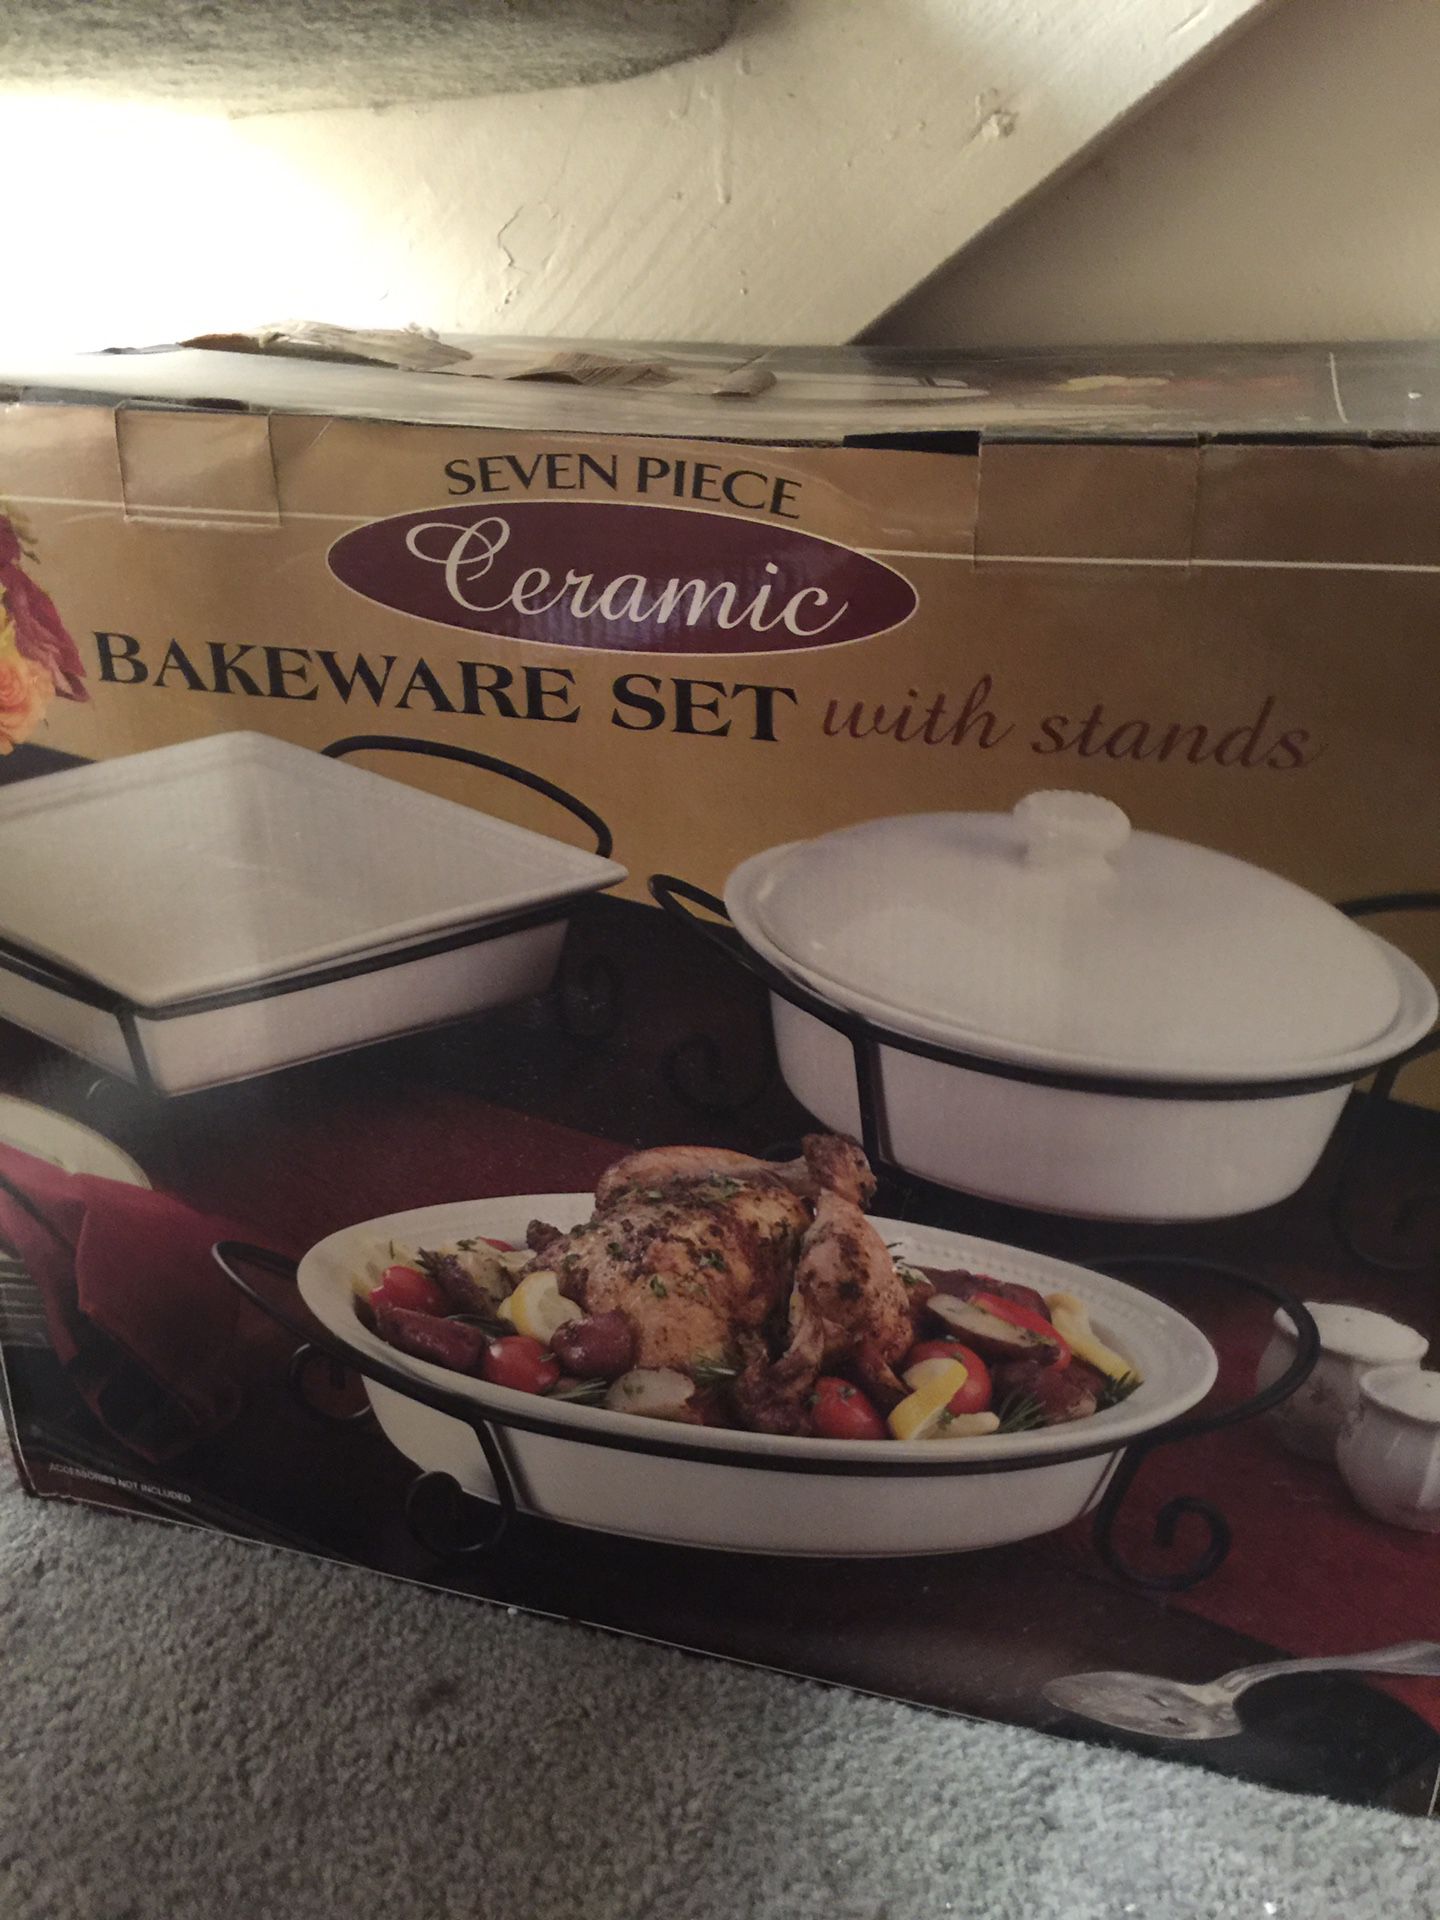 Bakeware set with stands